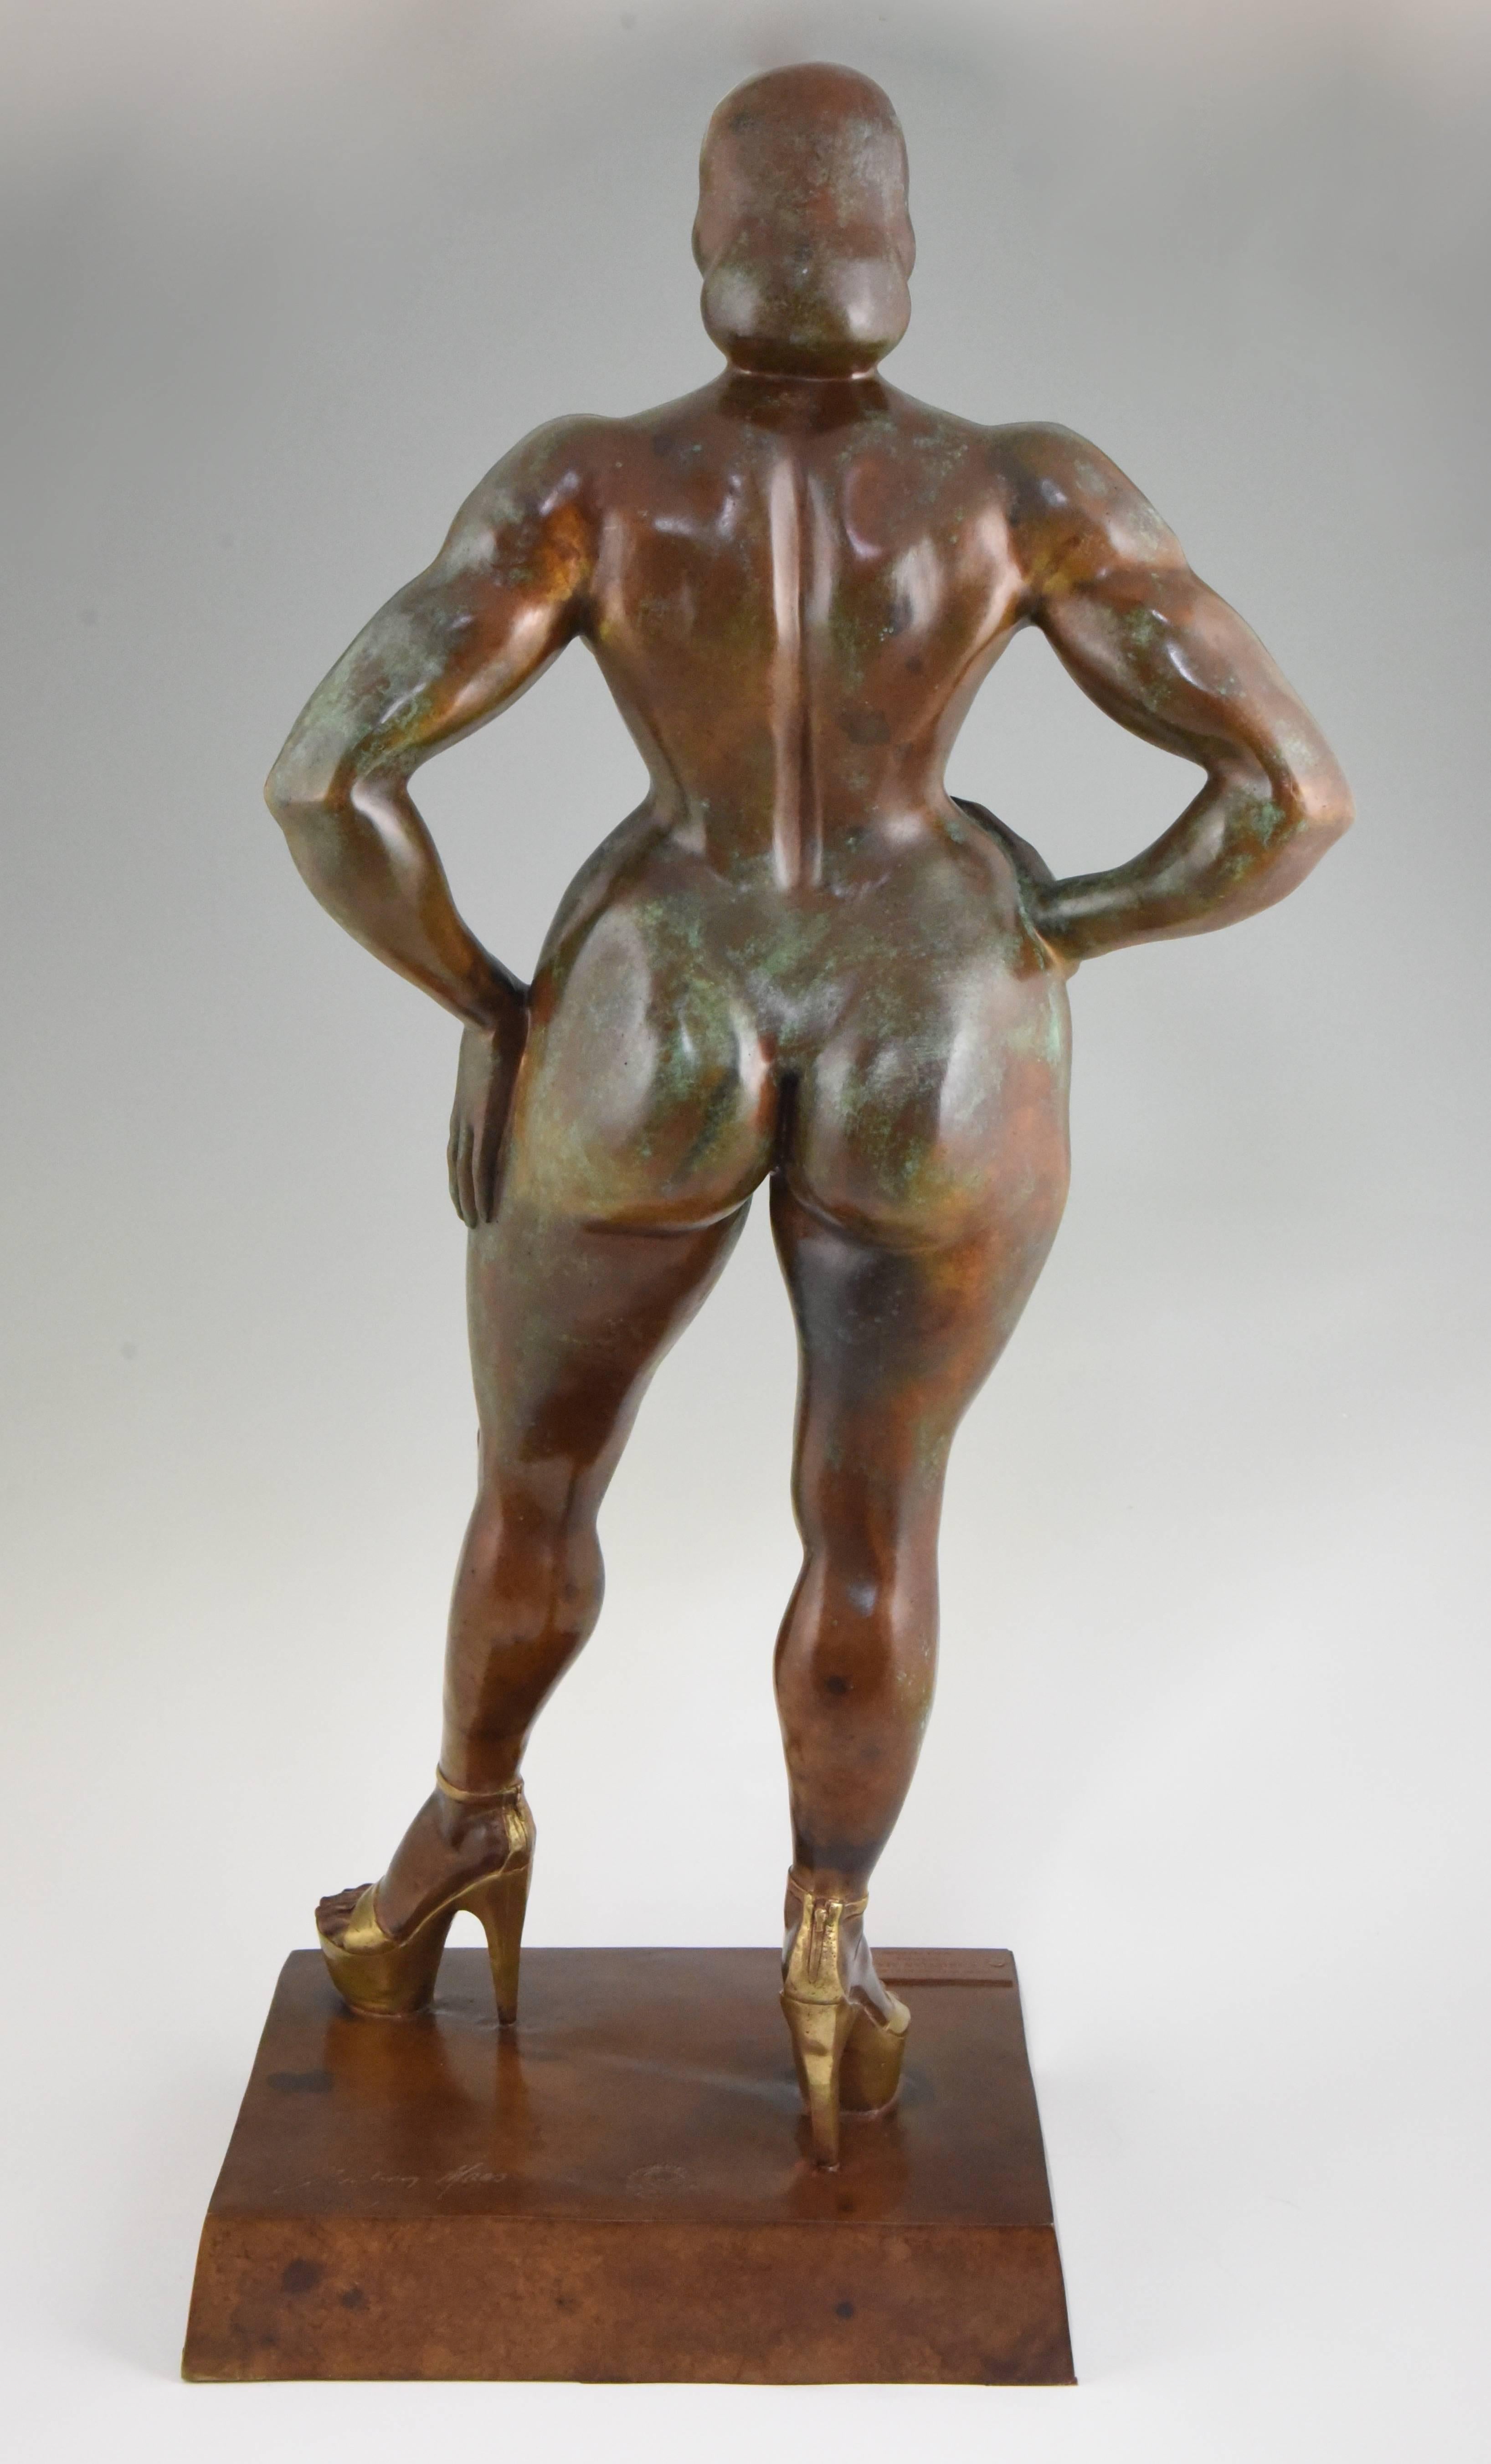 Impressive modern French bronze sculpture of a voluptuous nude on high heels entitled Venus Hottentote.

Artist/ maker: Christian Maas
Signature/ marks: Christian Maas?, numbered 5/33, foundry seal
Style: Contemporary.
Date: 1980
Material: